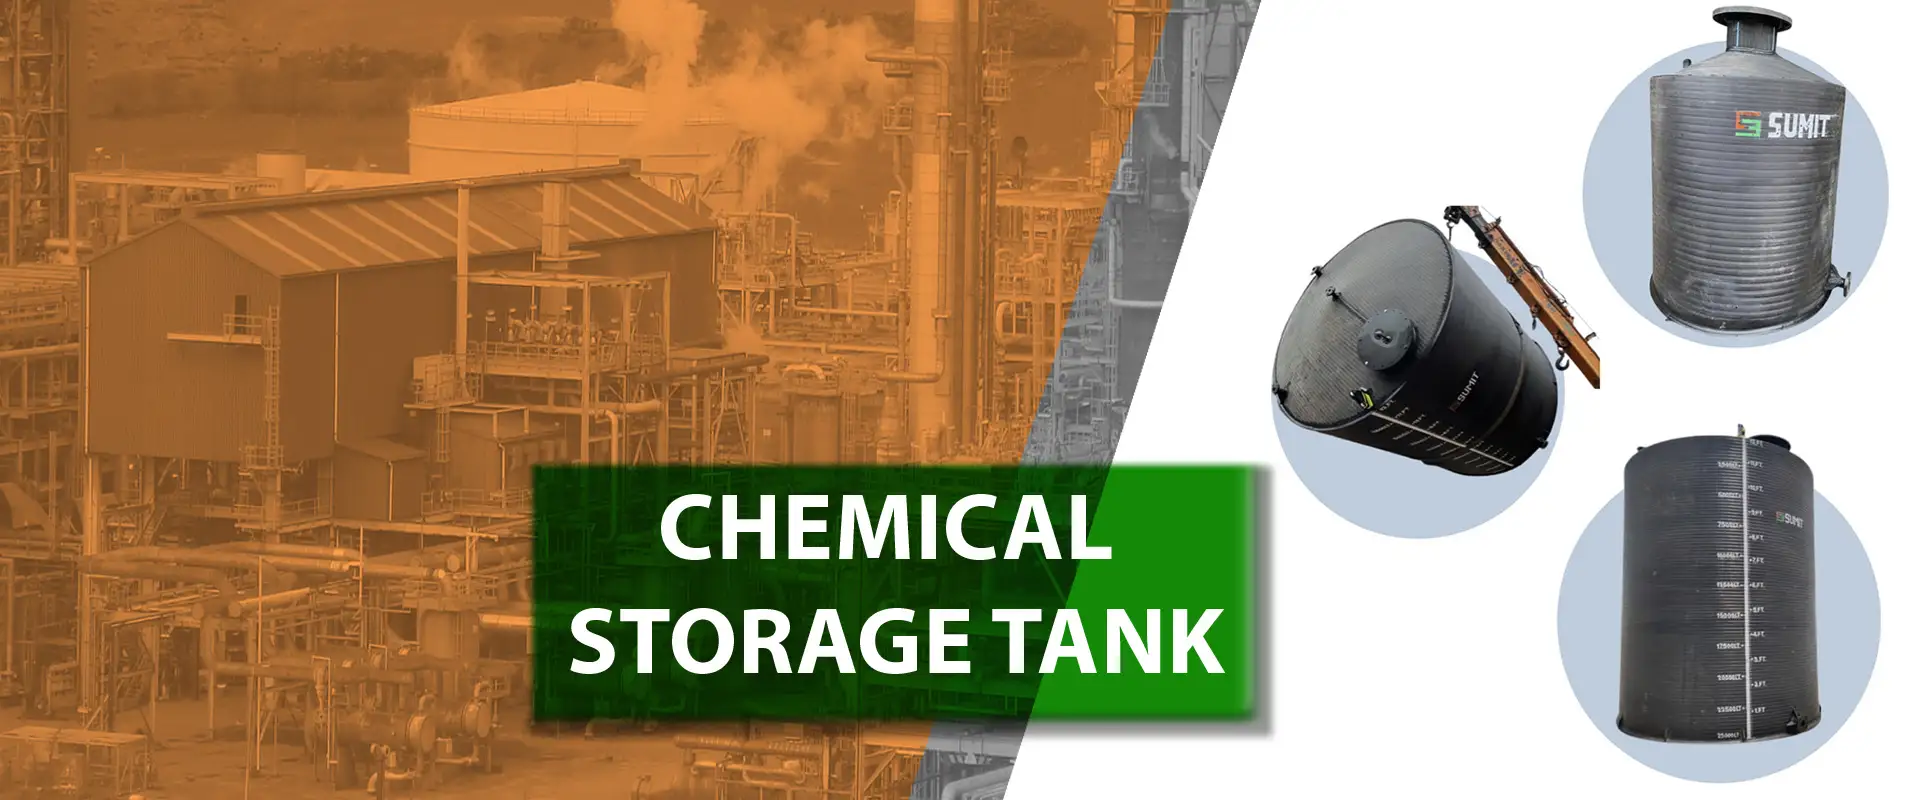 chemical storage equipments in India